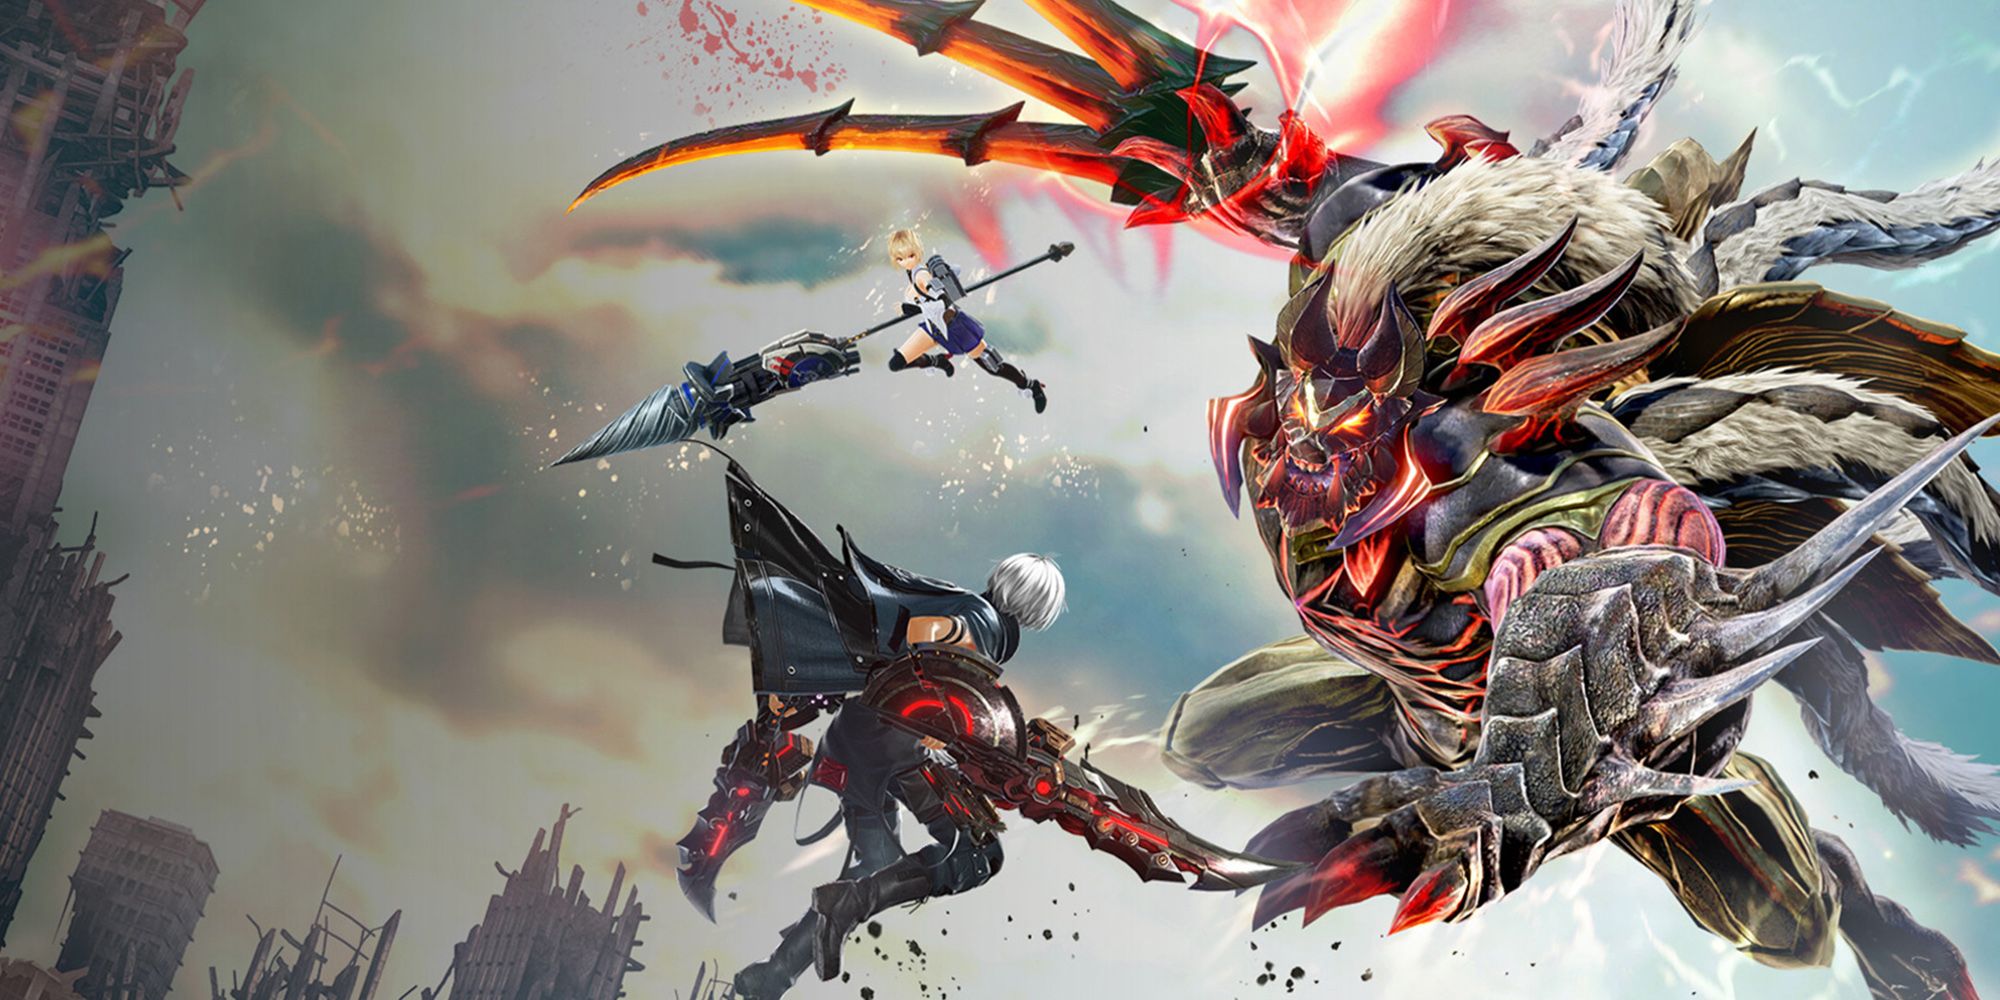 Cover Art For God Eater 3 Where Main Characters Are Fighting An Aragami